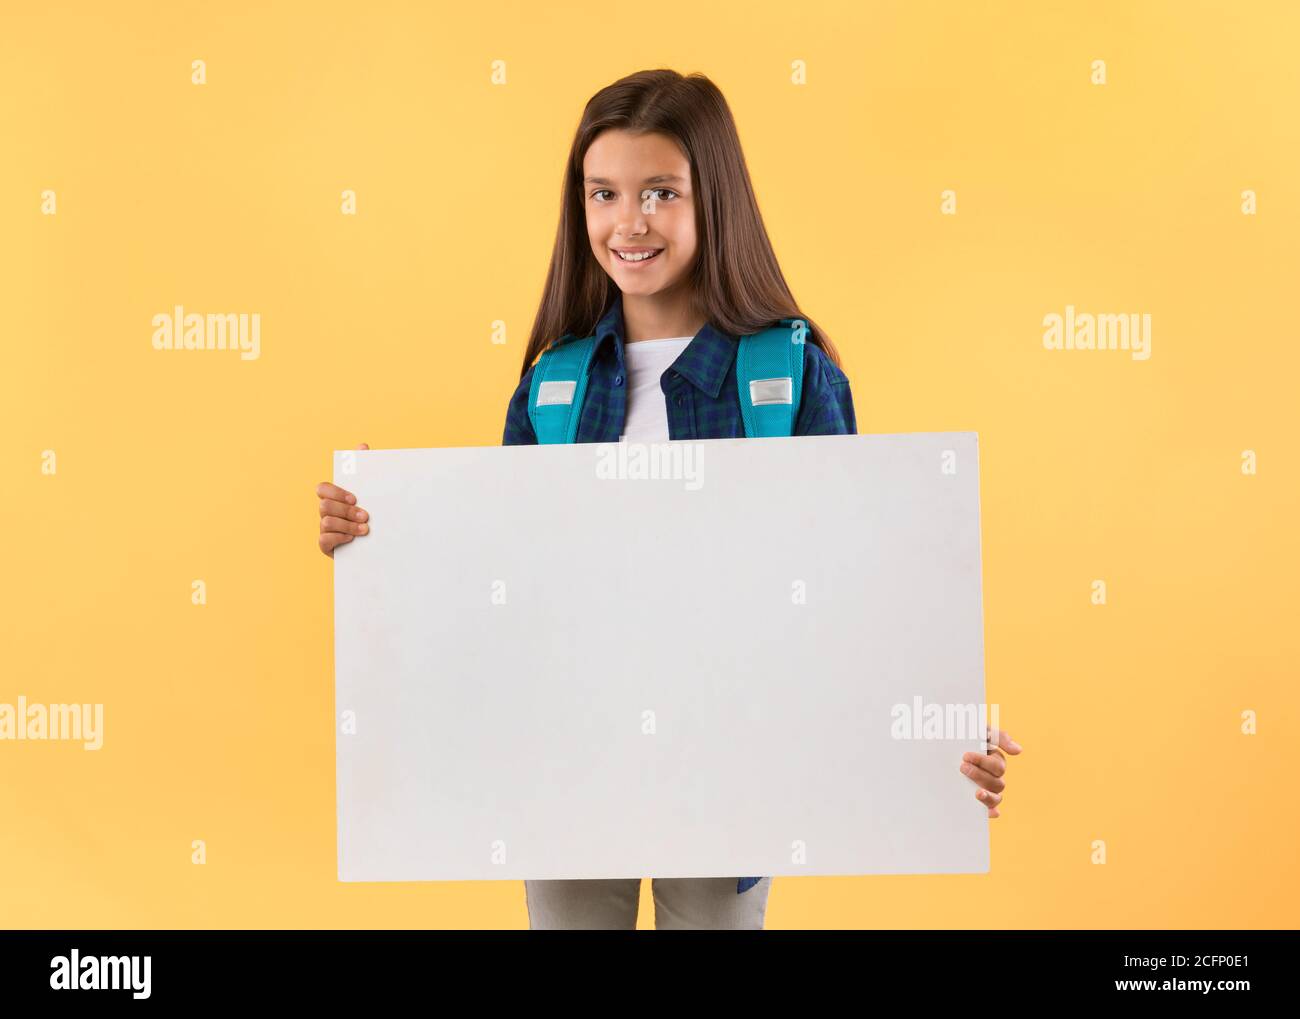 Excited little girl holding white paper for promo Stock Photo